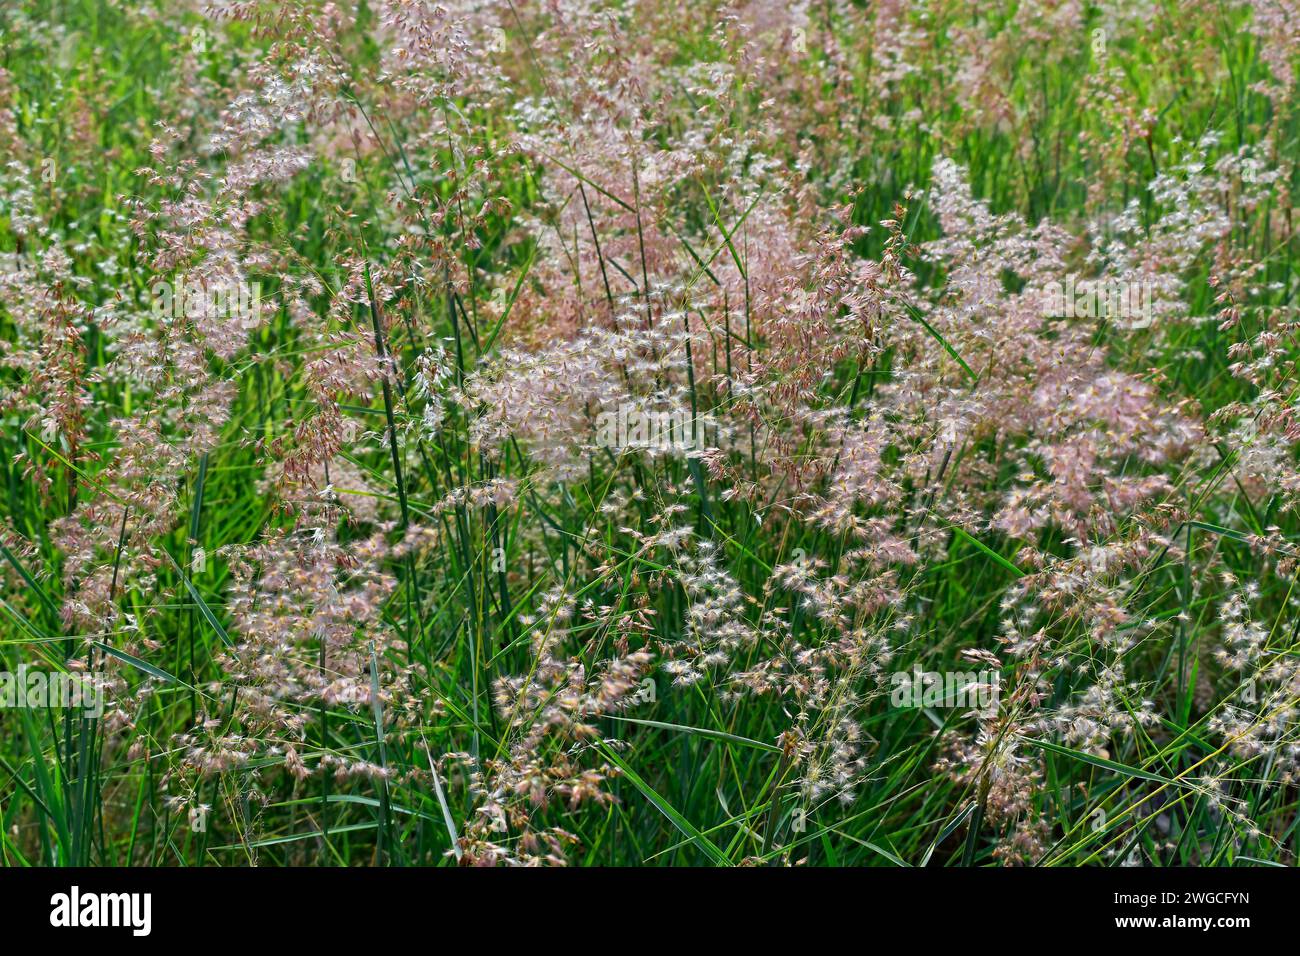 Rose Natal grass or Natal grass flowers (Melinis repens) Stock Photo